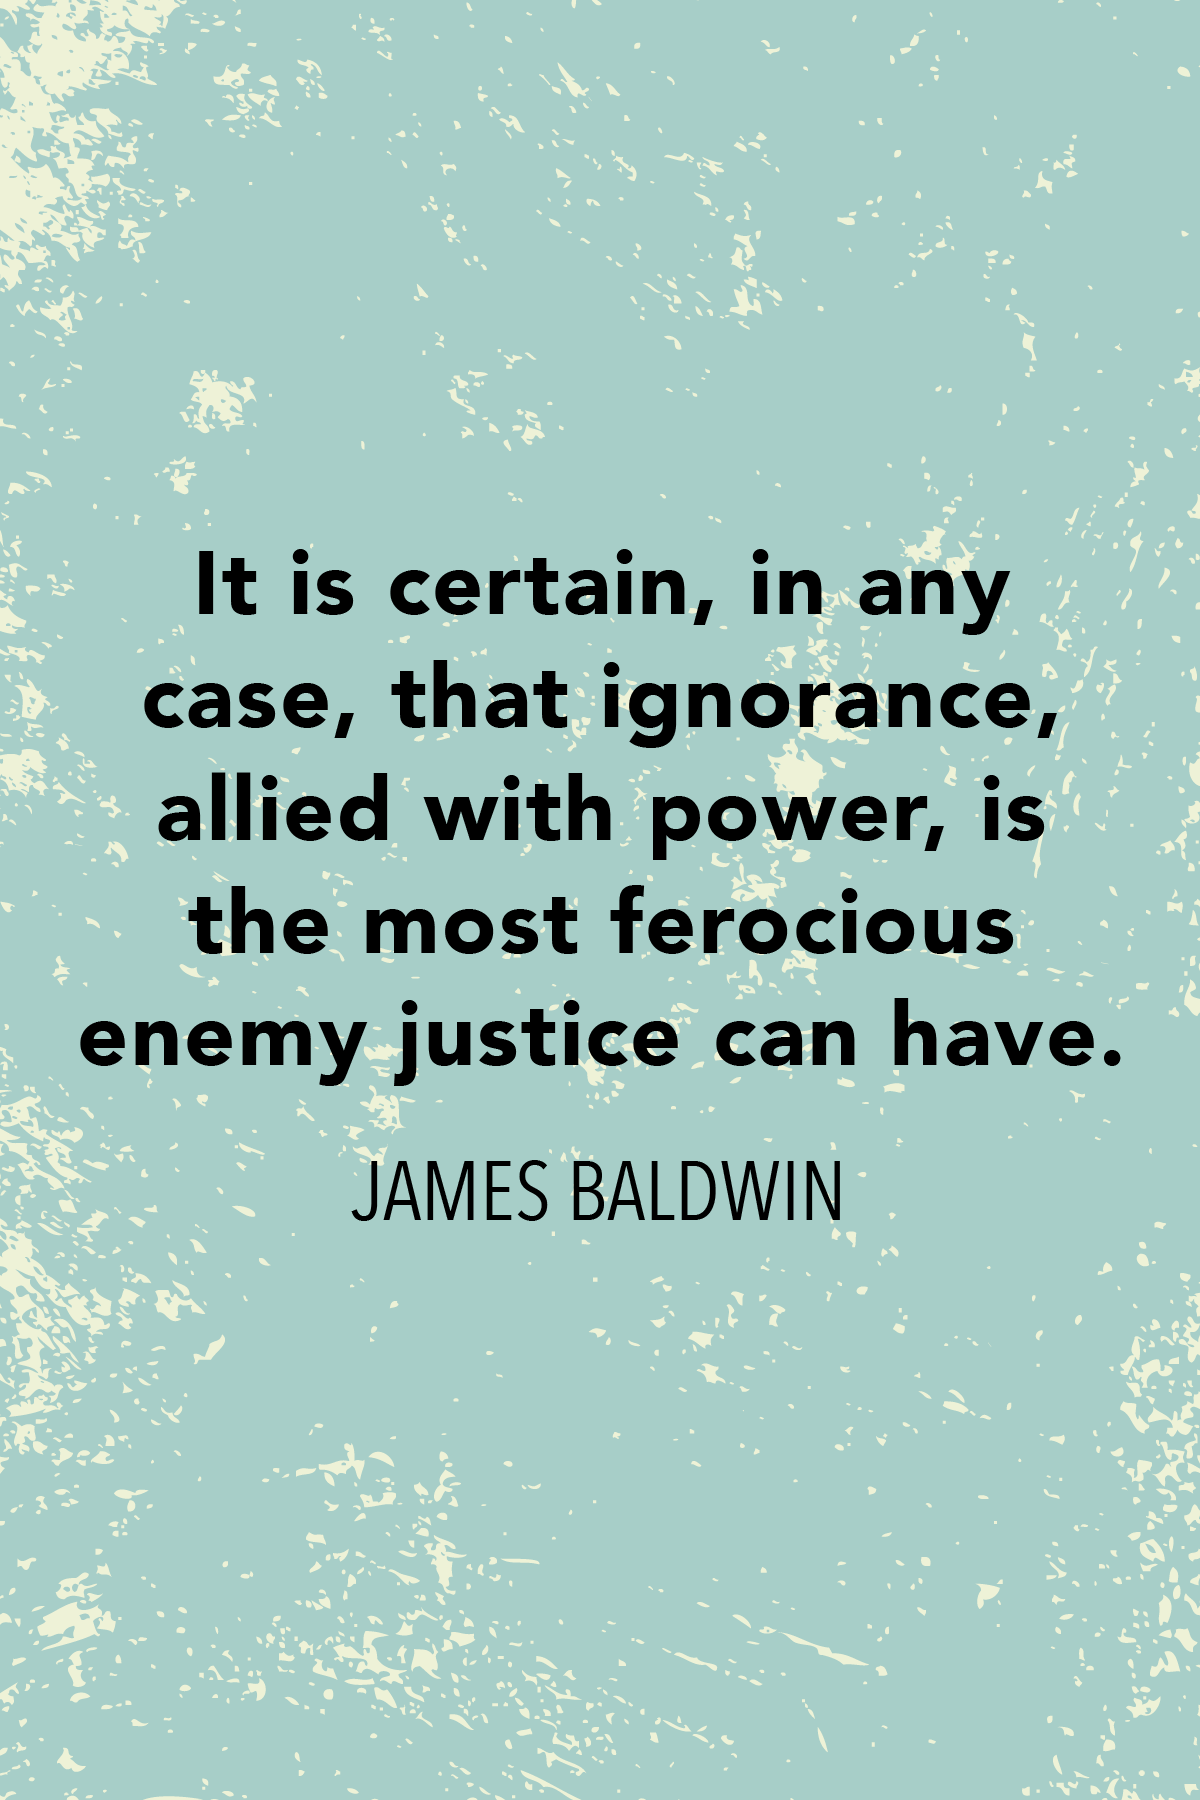 justice quotes and sayings